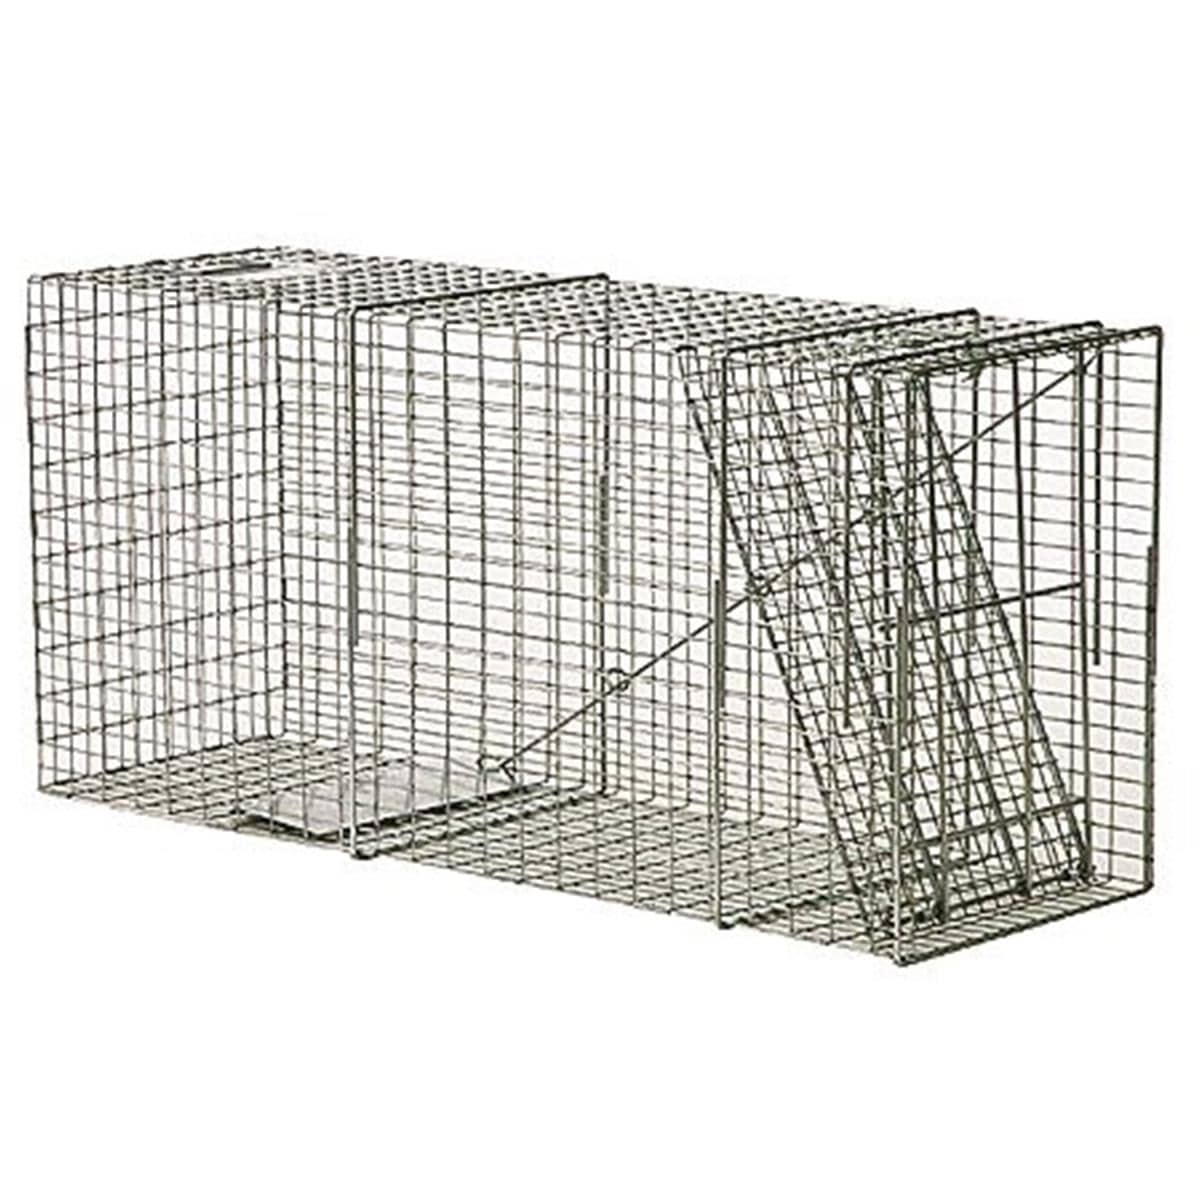 Bobcat / Coyote/ Small Feral Dog Galvanized Metal Live Transfer Animal Trap  with 1 x 2 Grid